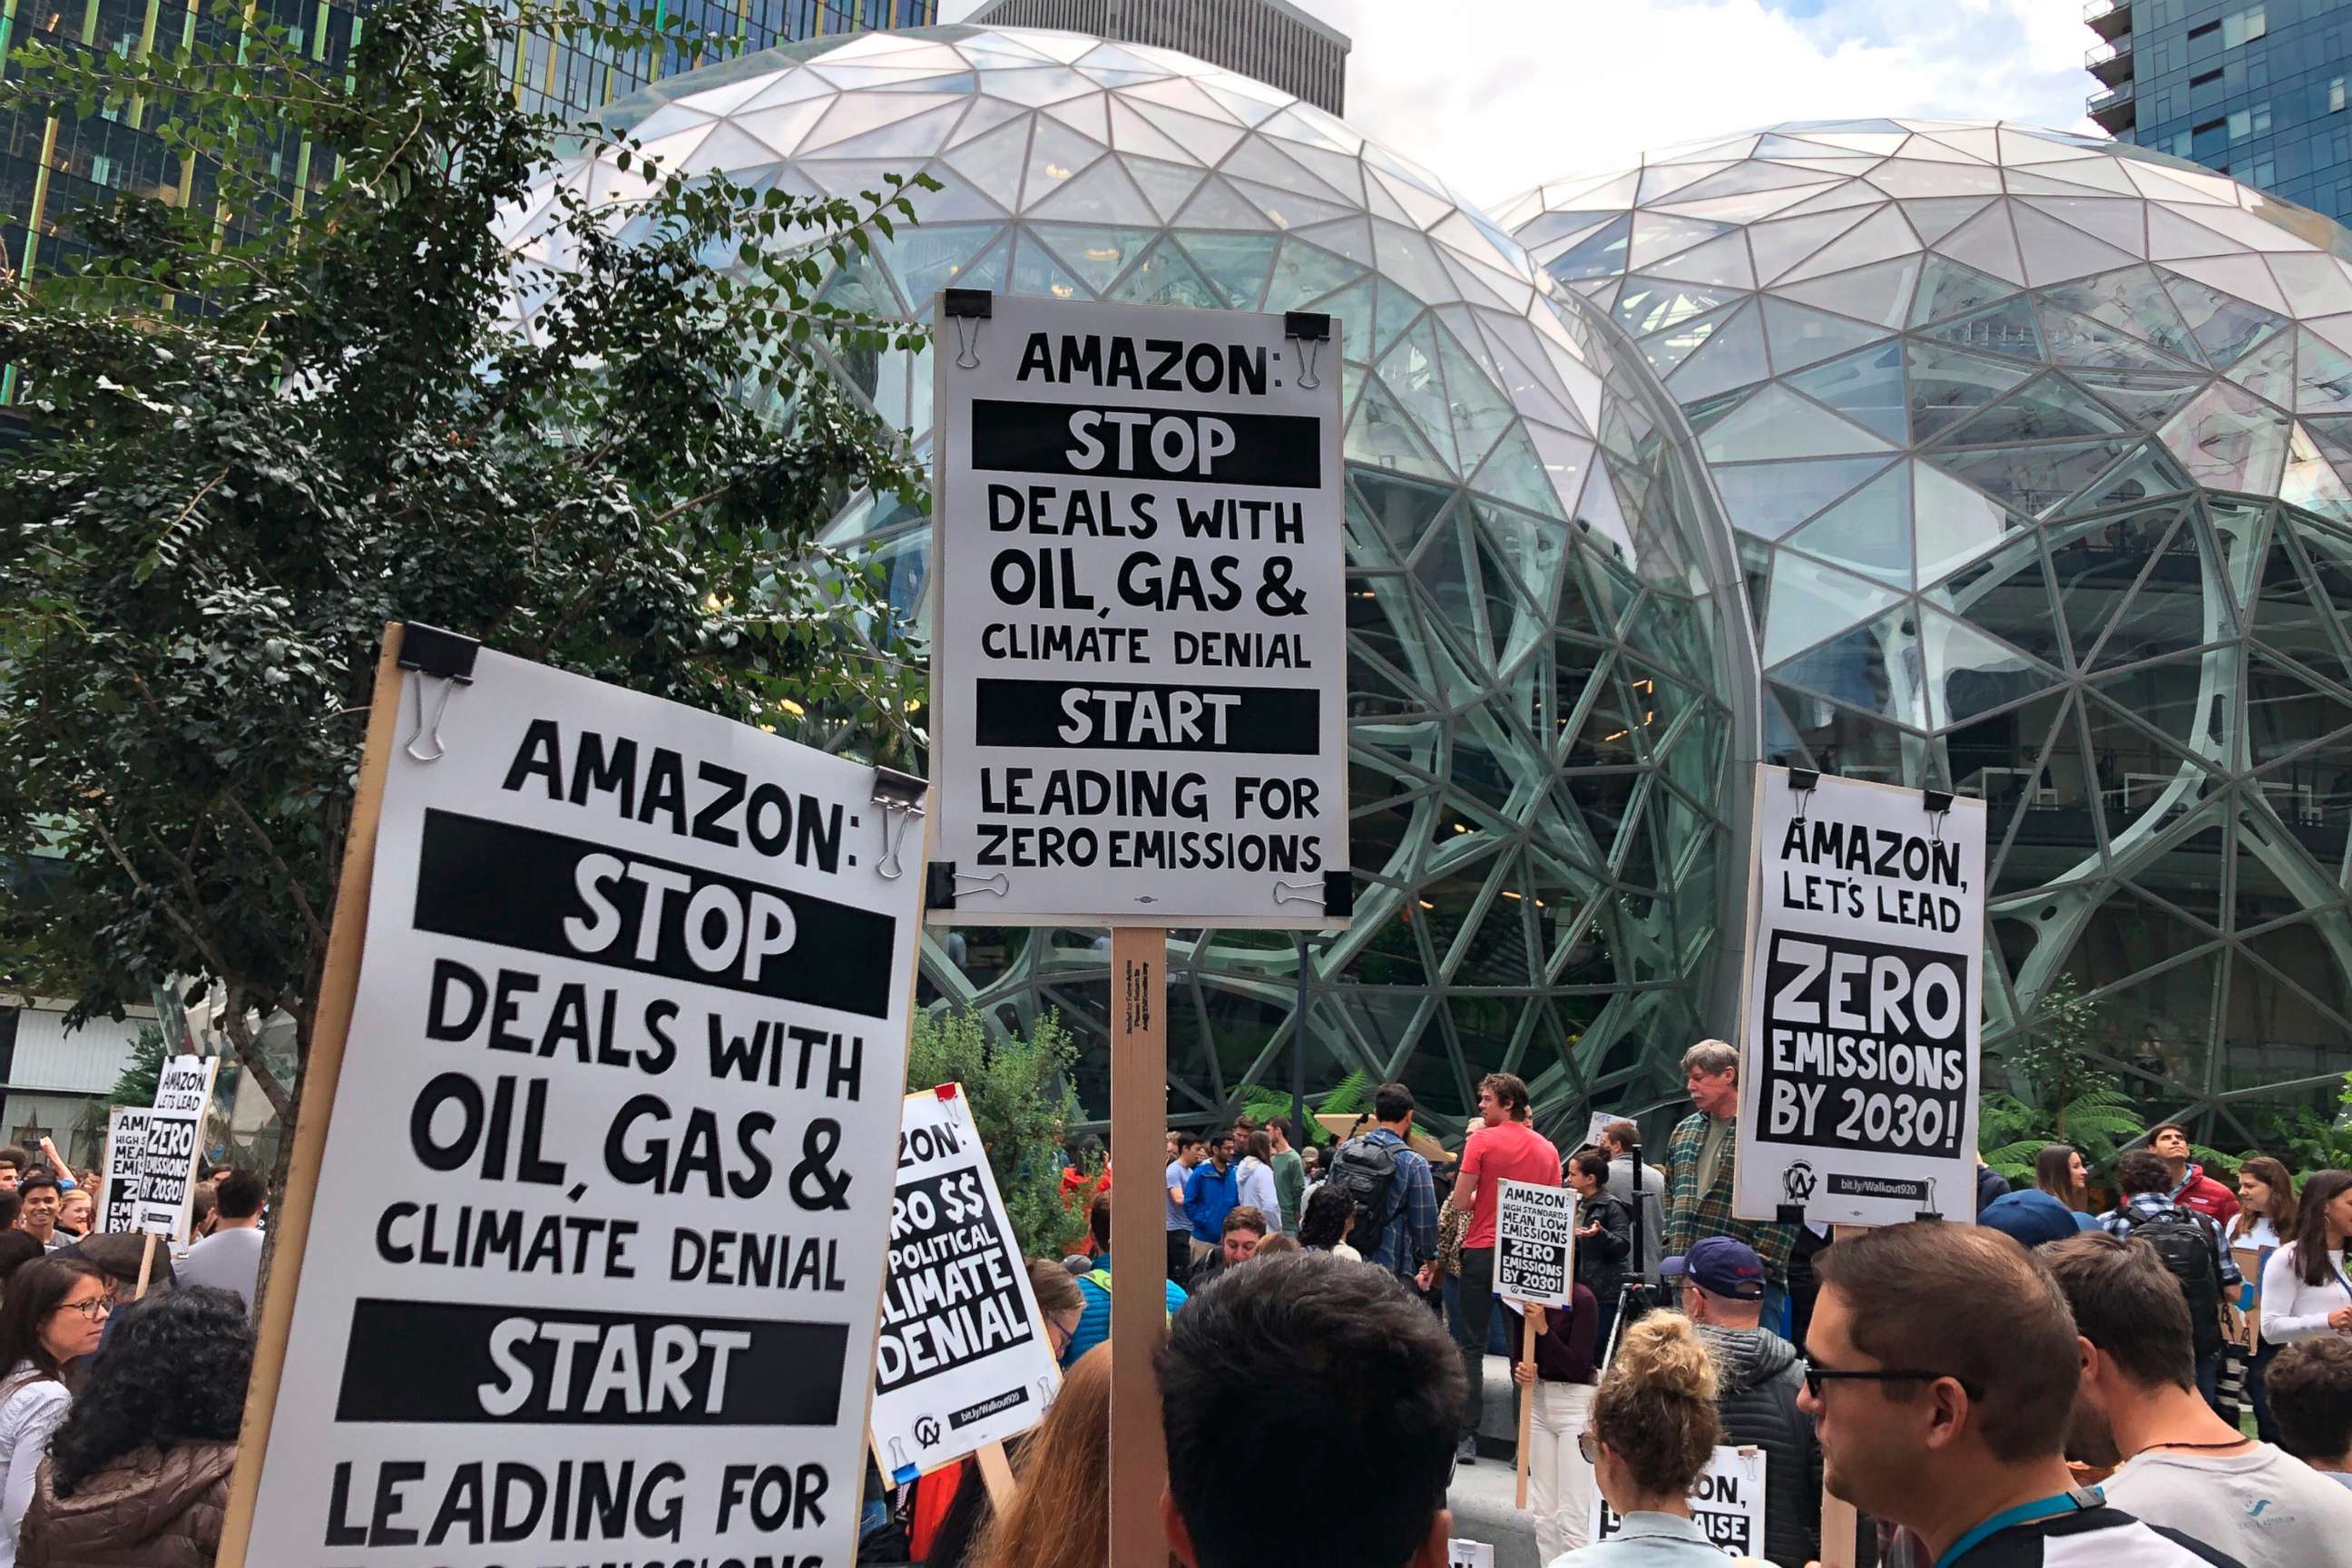 PHOTO: Amazon workers begin to gather in front of the Spheres, participating in the climate strike in Seattle, Sept. 20, 2019.